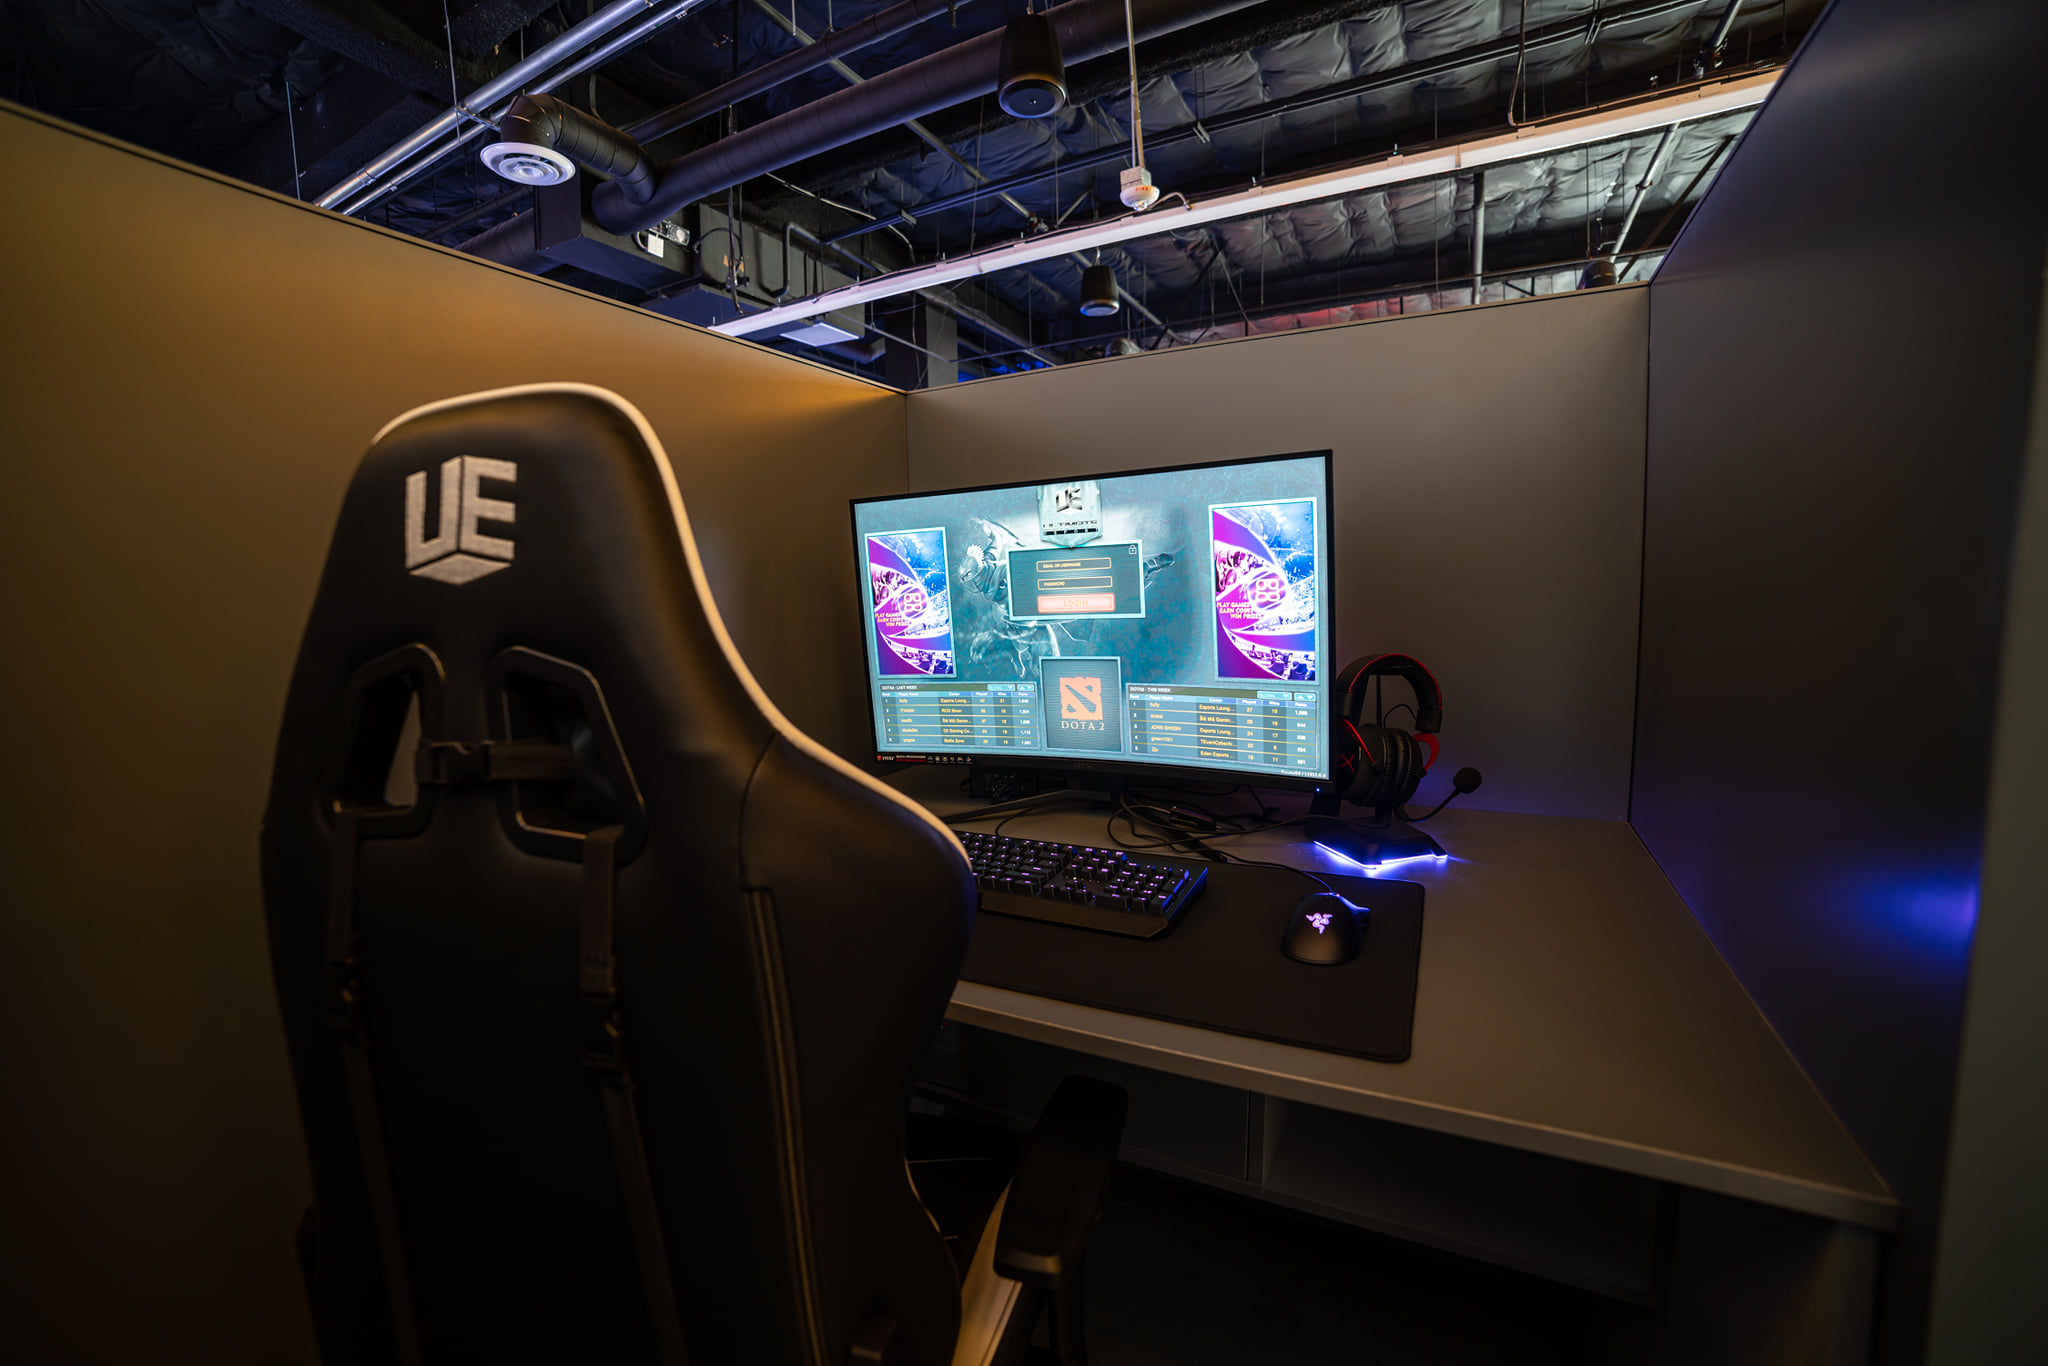 Professional players can focus on their game in Ultimate Esports Private Area